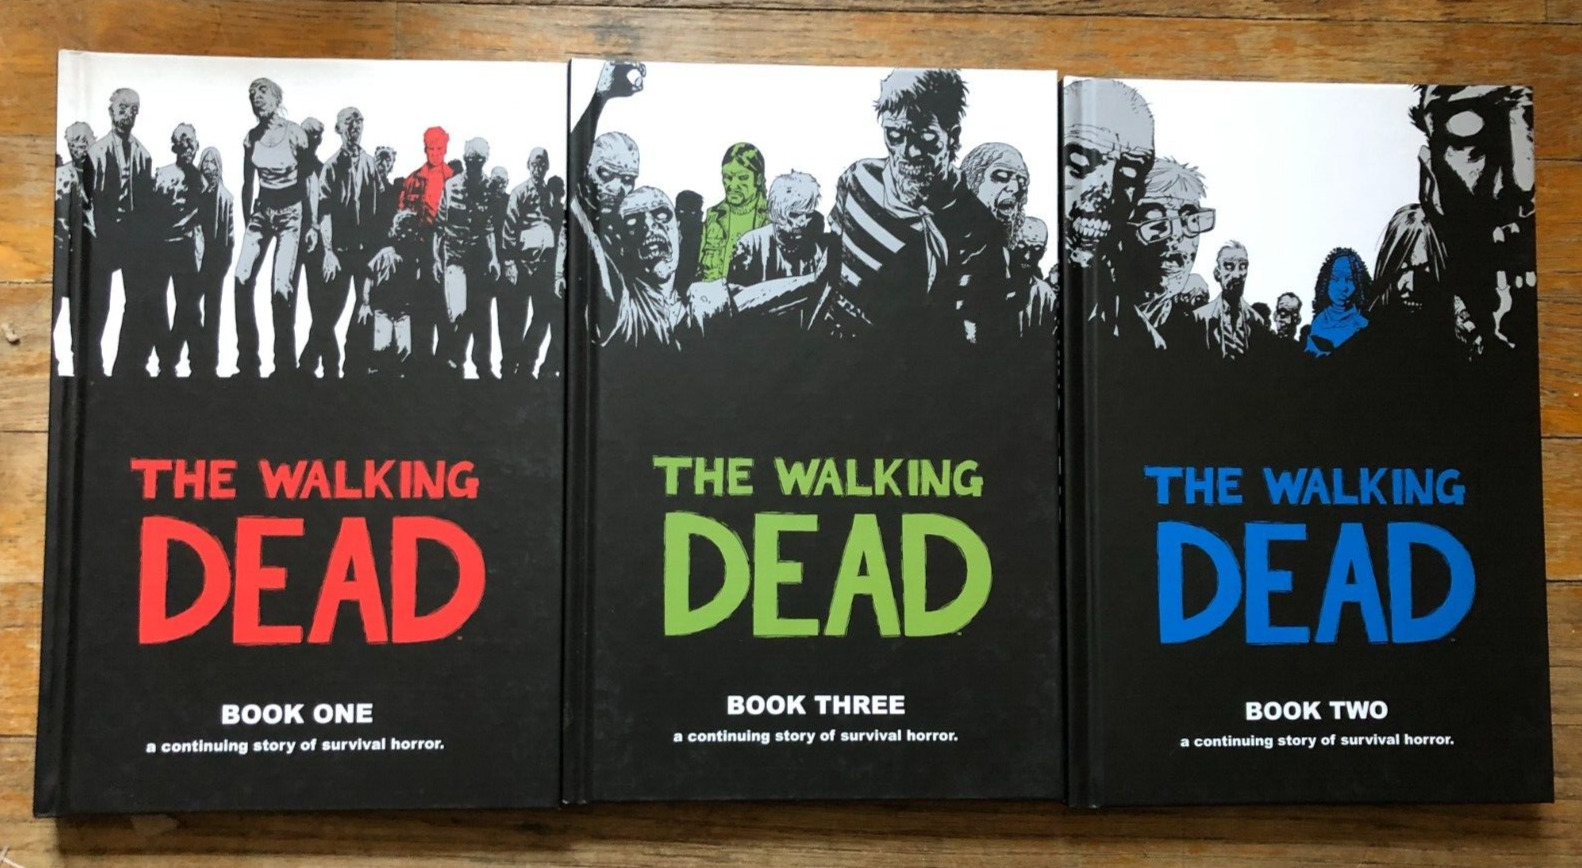 The Walking Dead Books Volume 1, 2, 3 Graphic Novel Comics Hard Cover Zombies